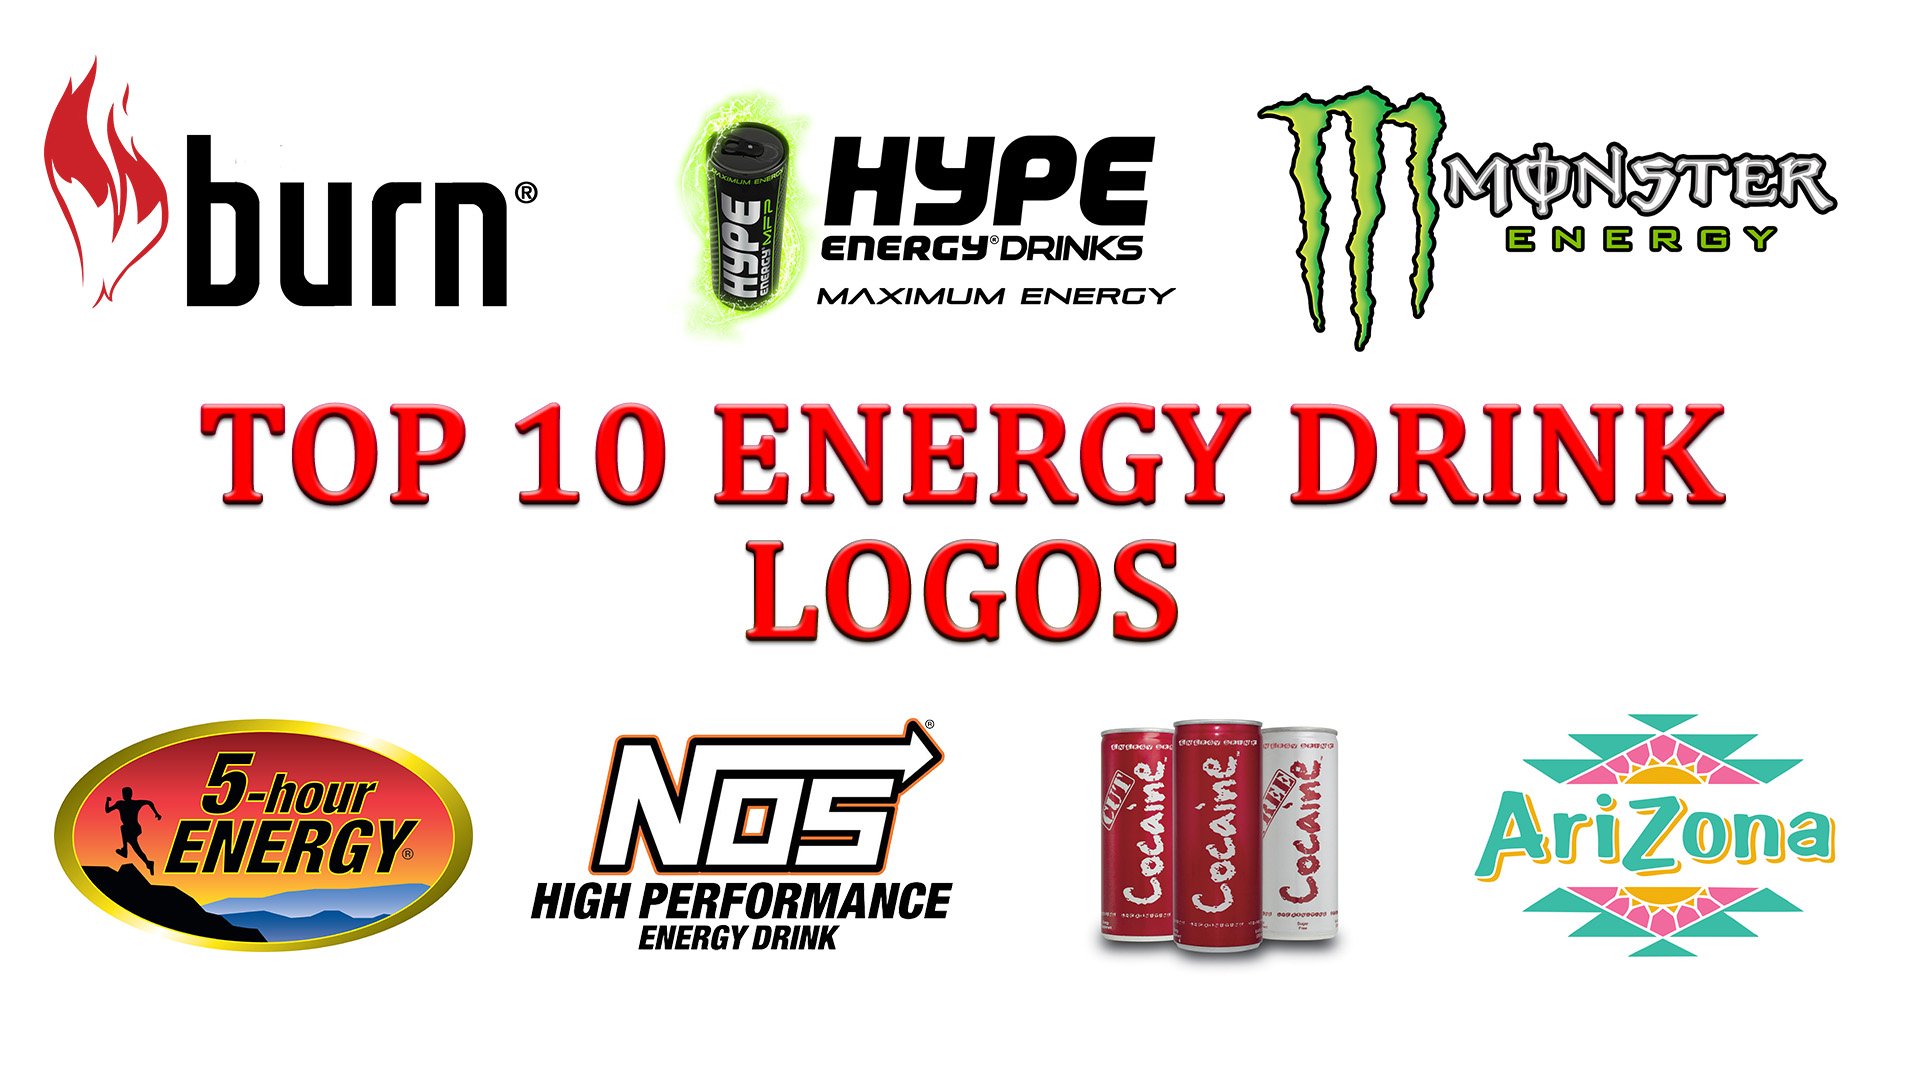 The most popular Energy drink logos